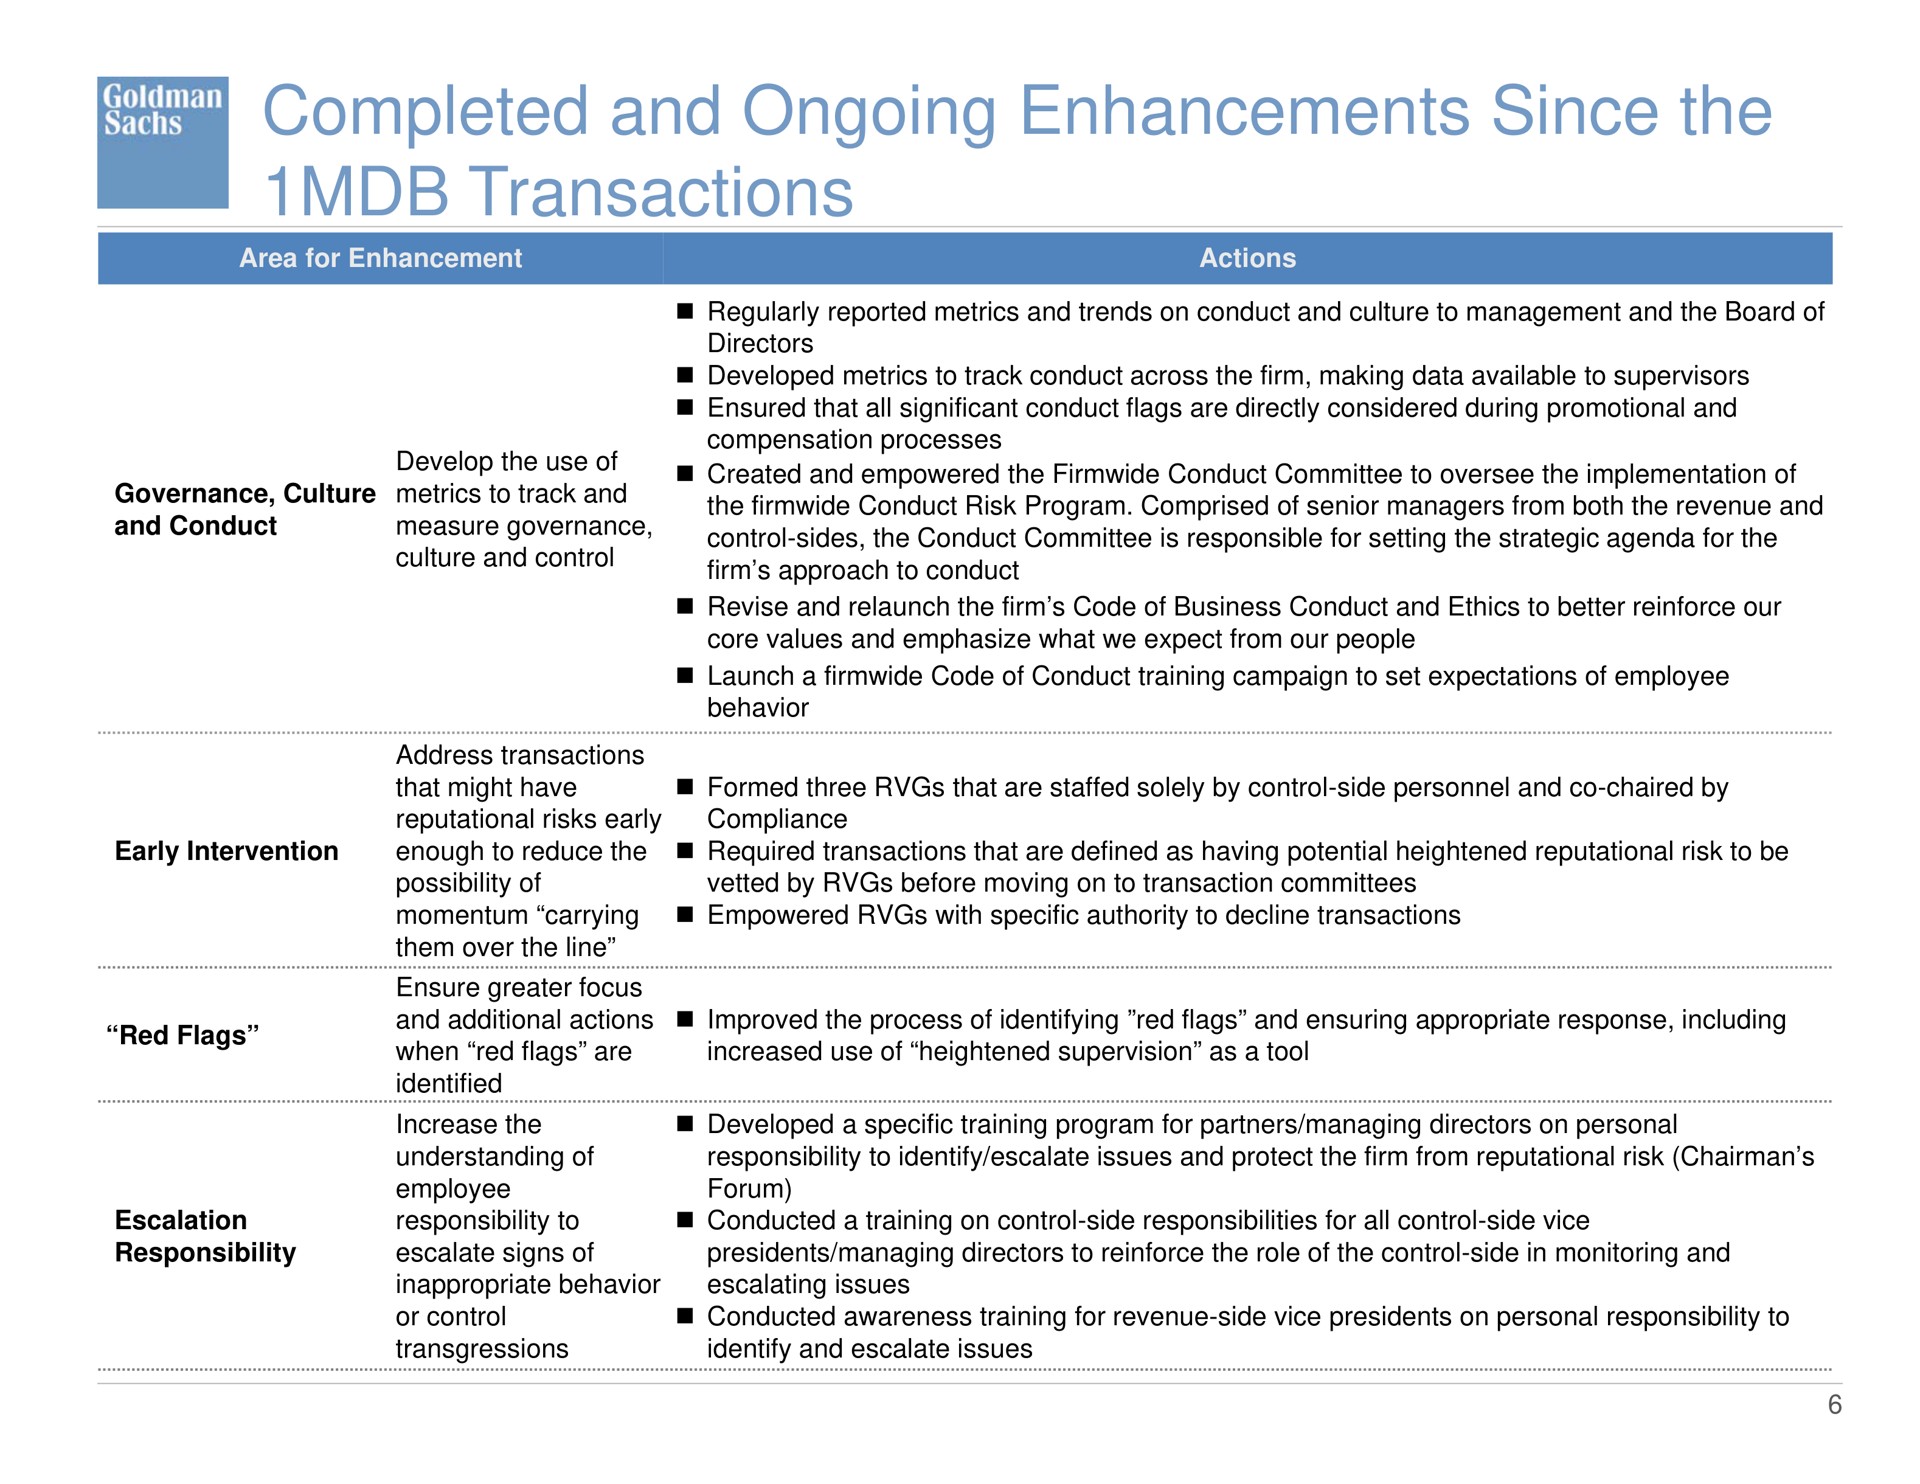 completed and ongoing enhancements since the transactions | Goldman Sachs